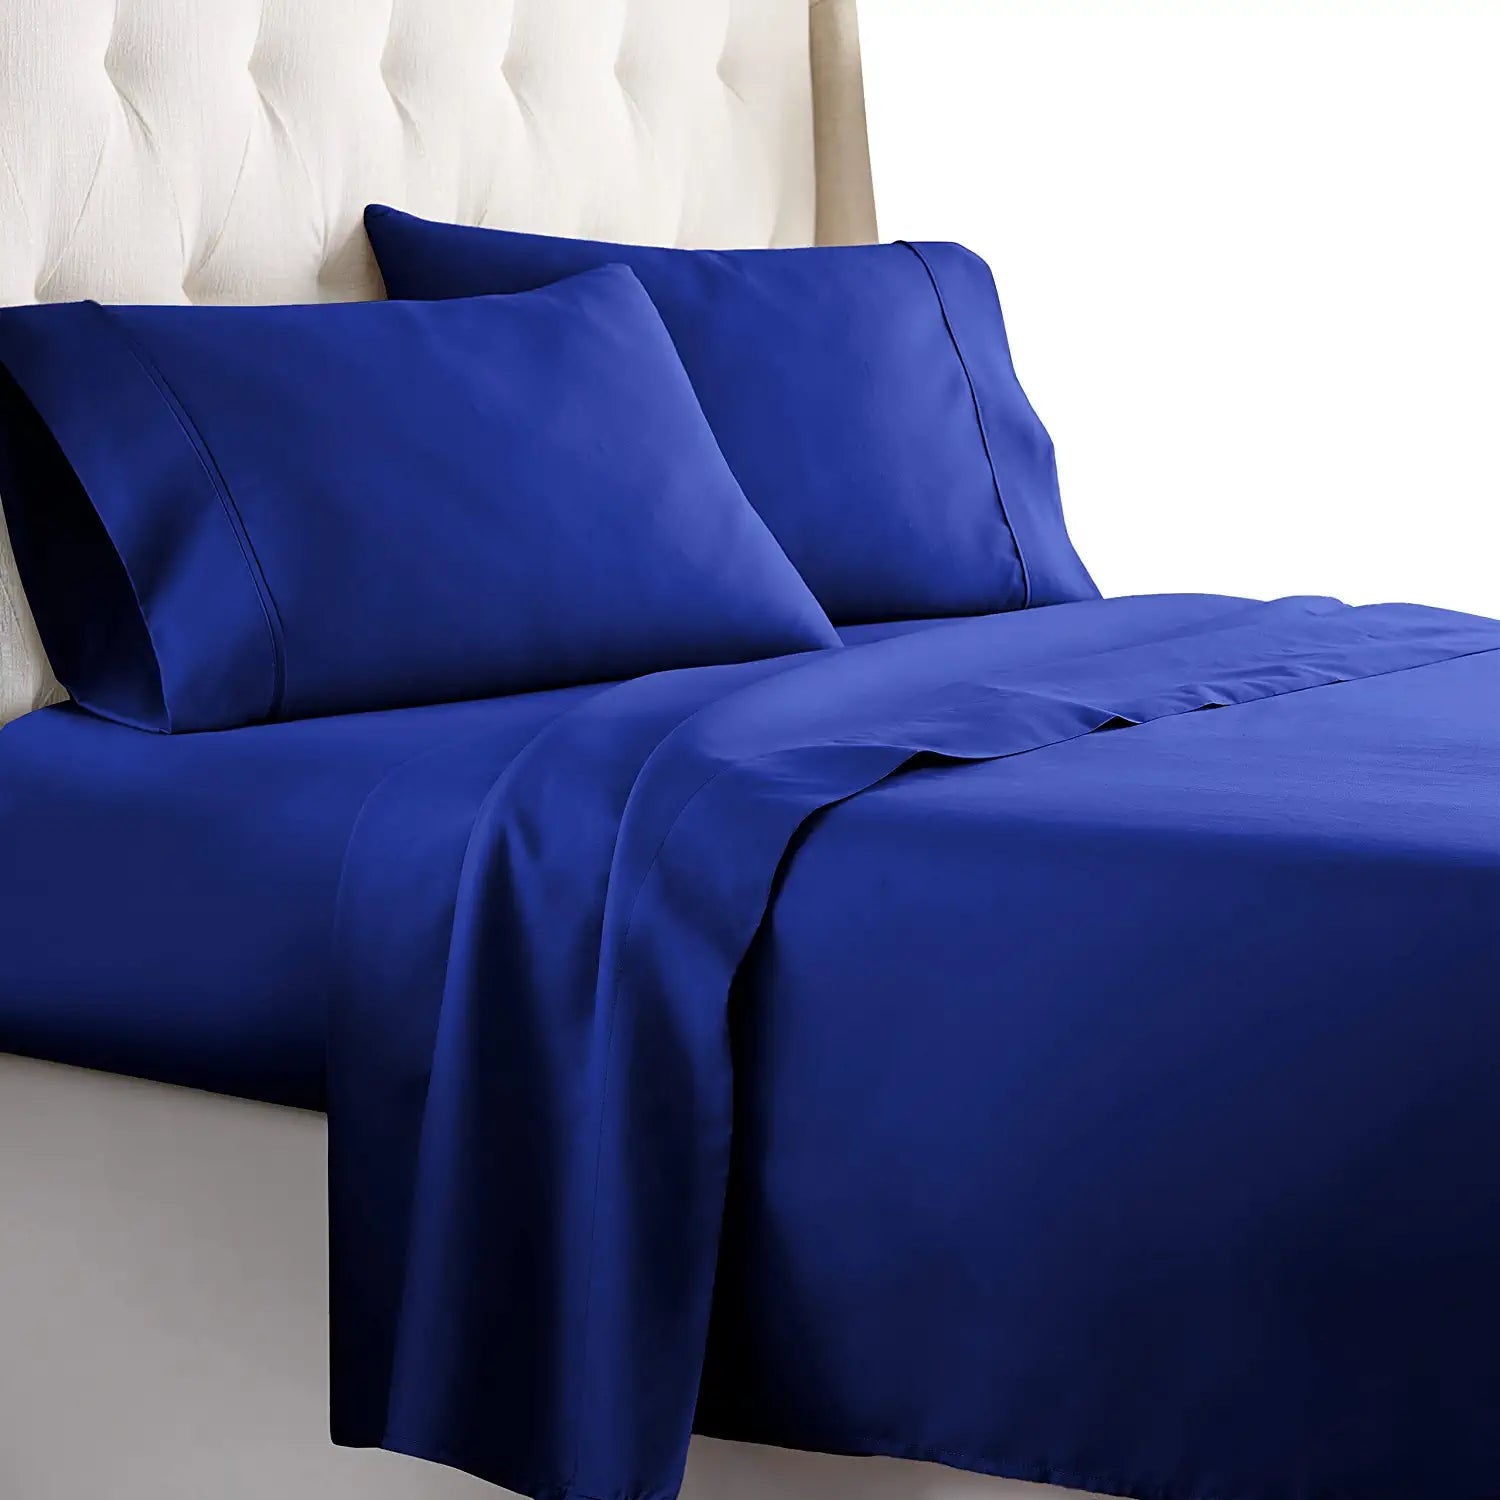 blue bed sheets